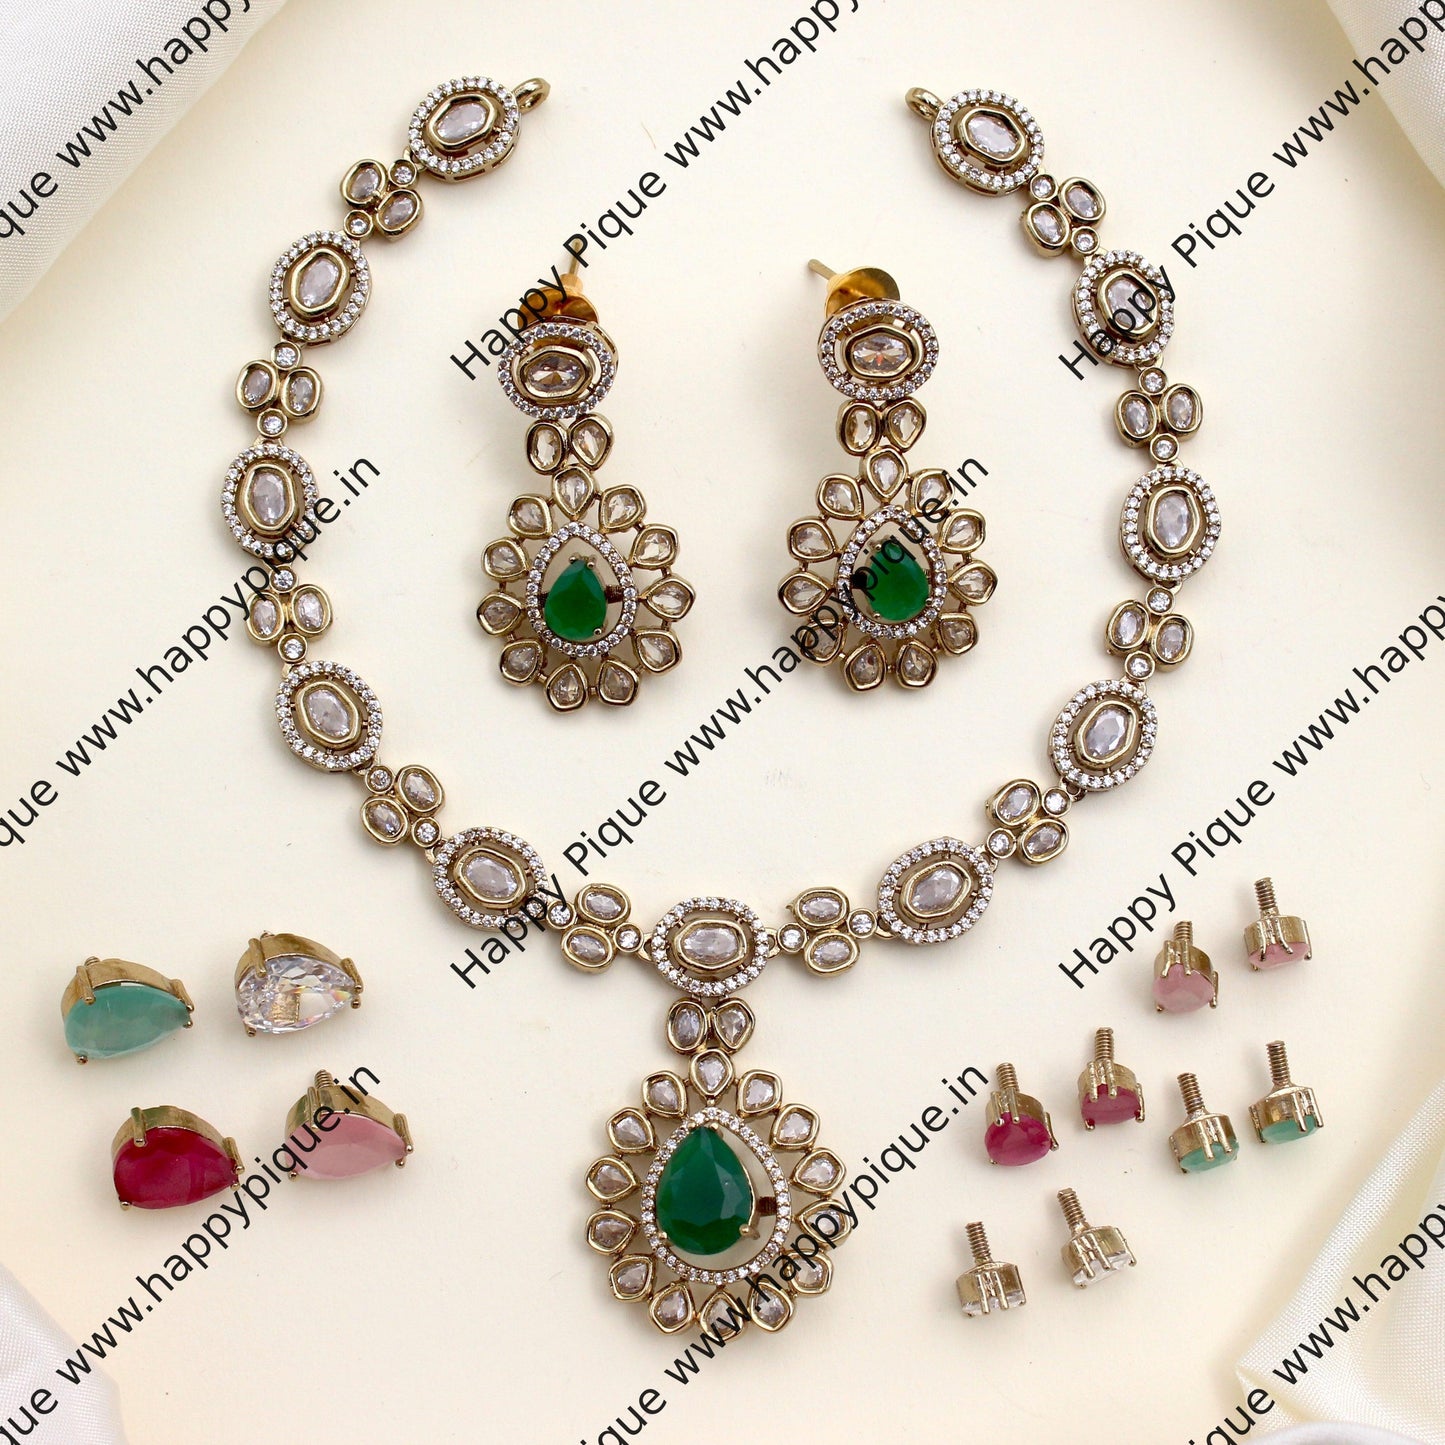 Victorian AD Stone Changeable Bridal Necklace Set